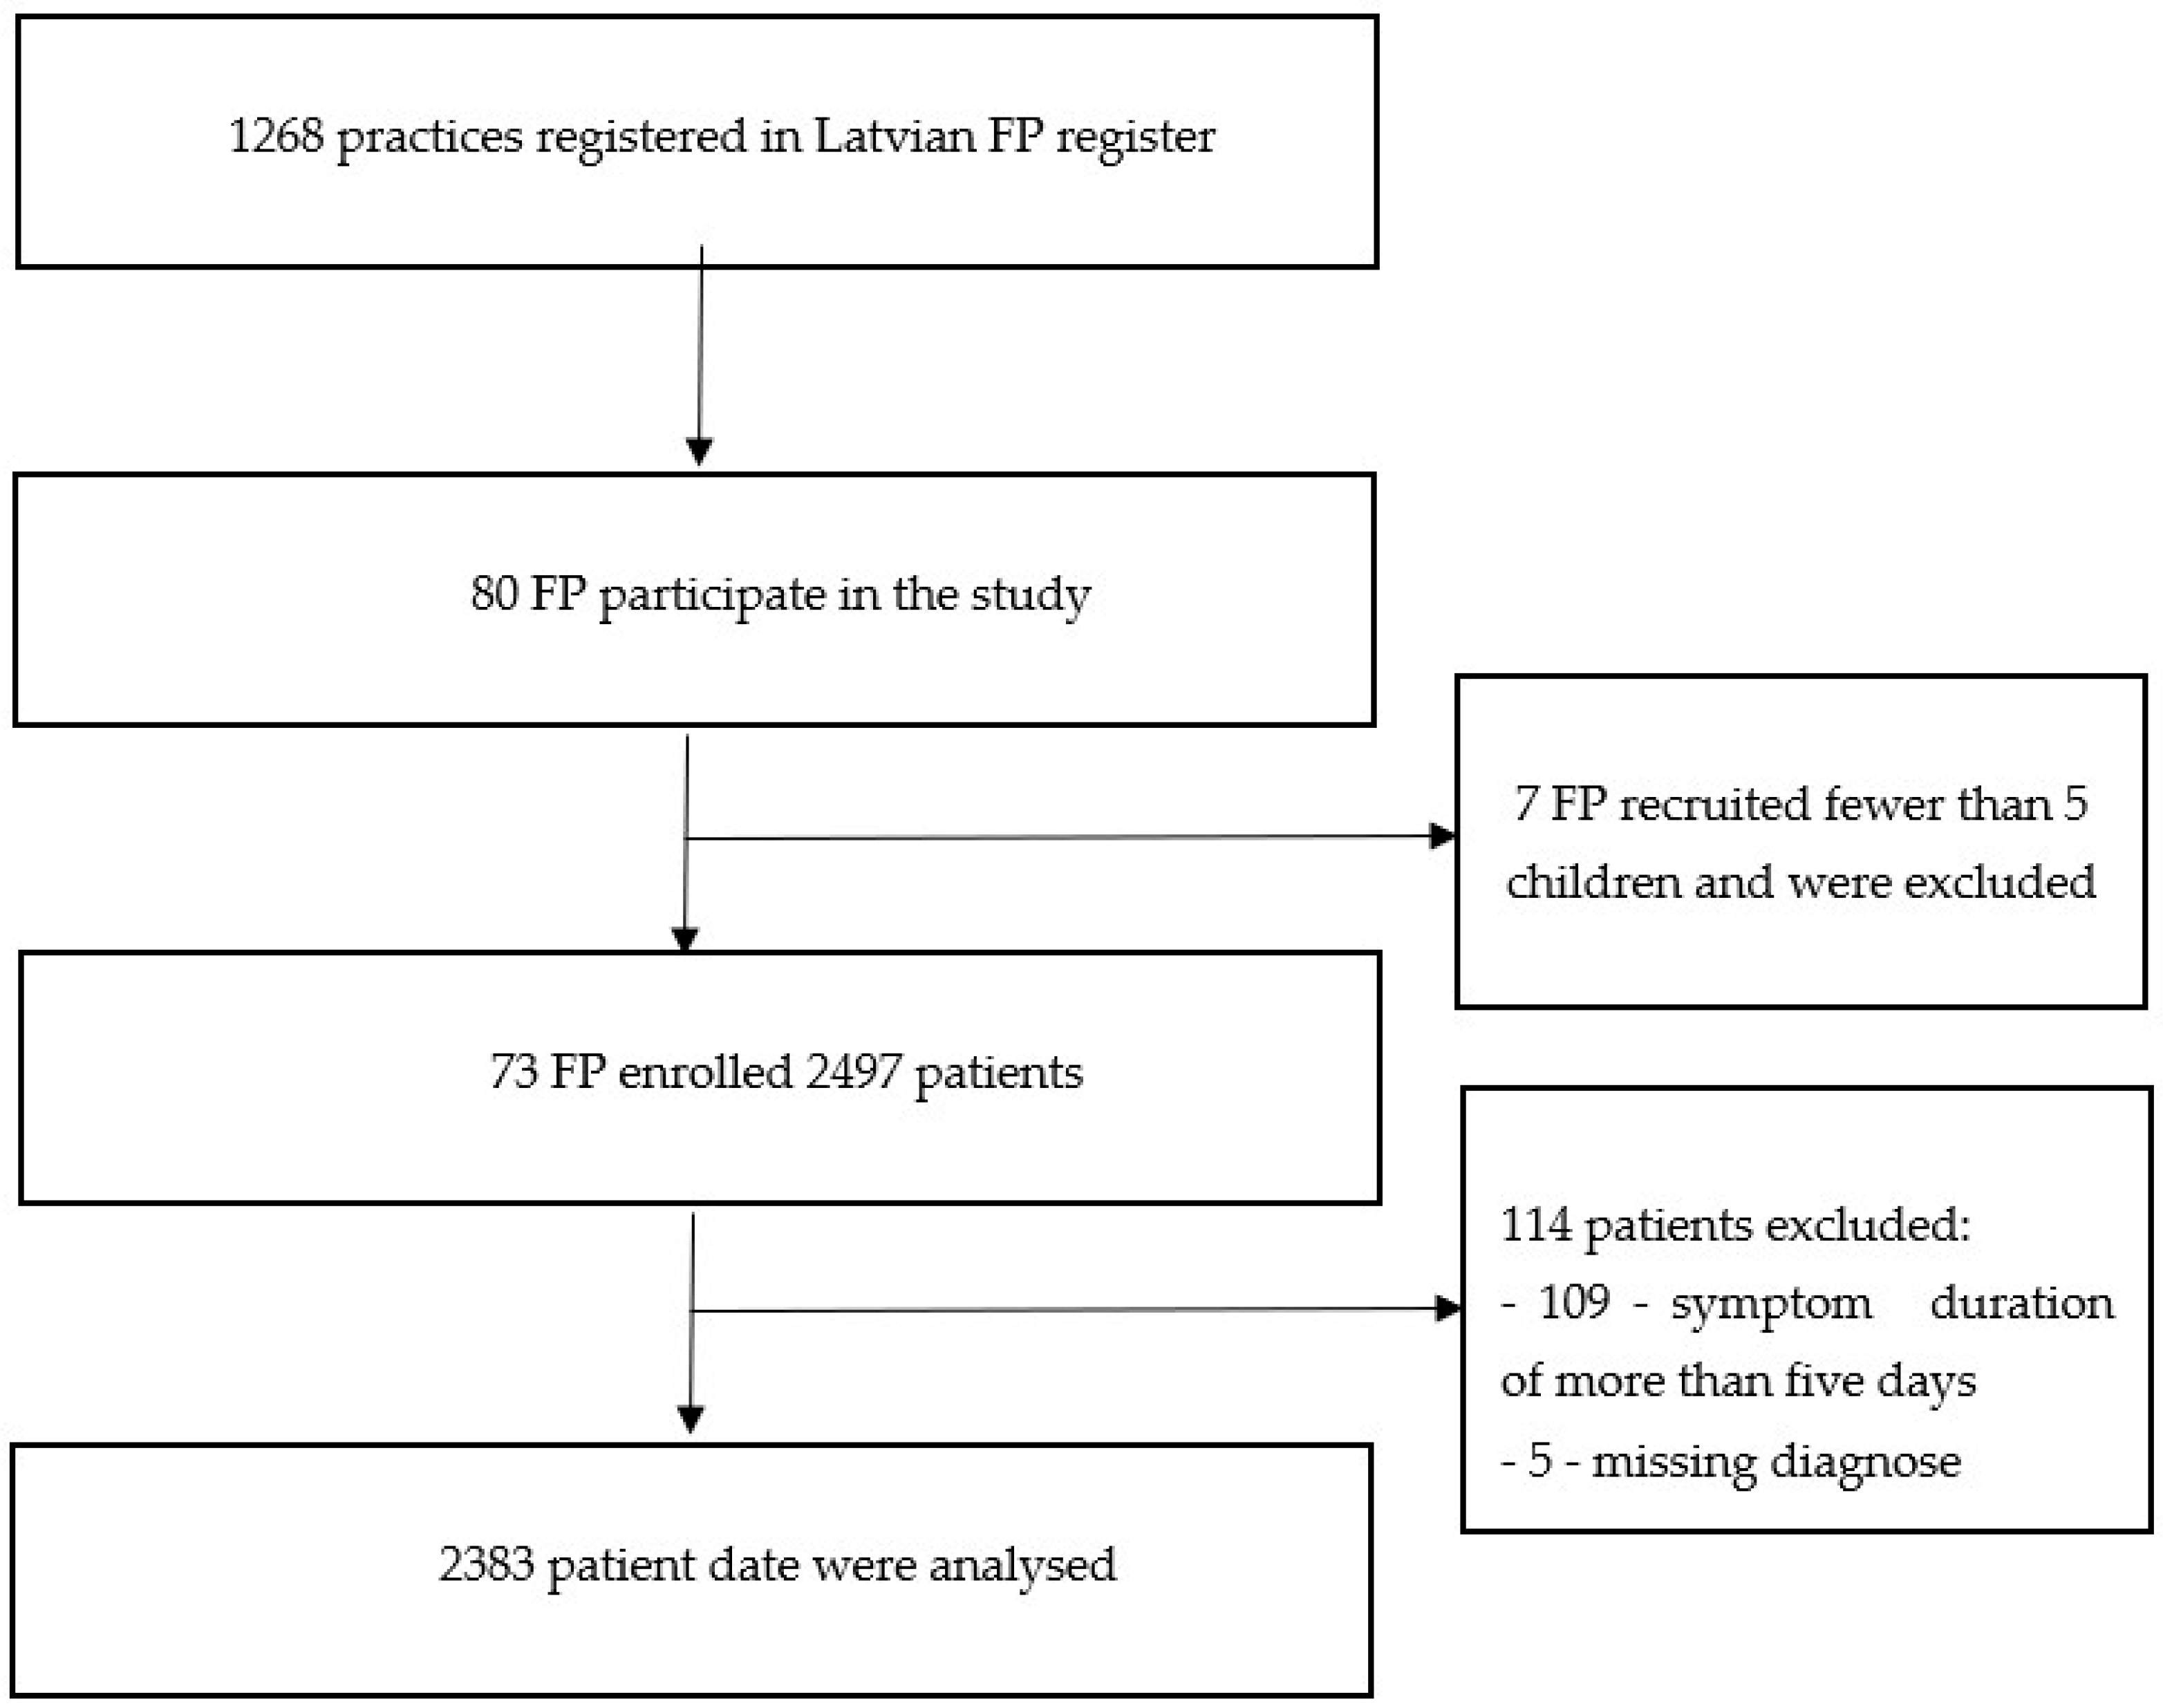 Medicina | Free Full-Text Latvian Primary Care of Children with Acute Infections: Antibiotic-Prescribing Habits and Diagnostic Process Prior to Treatment